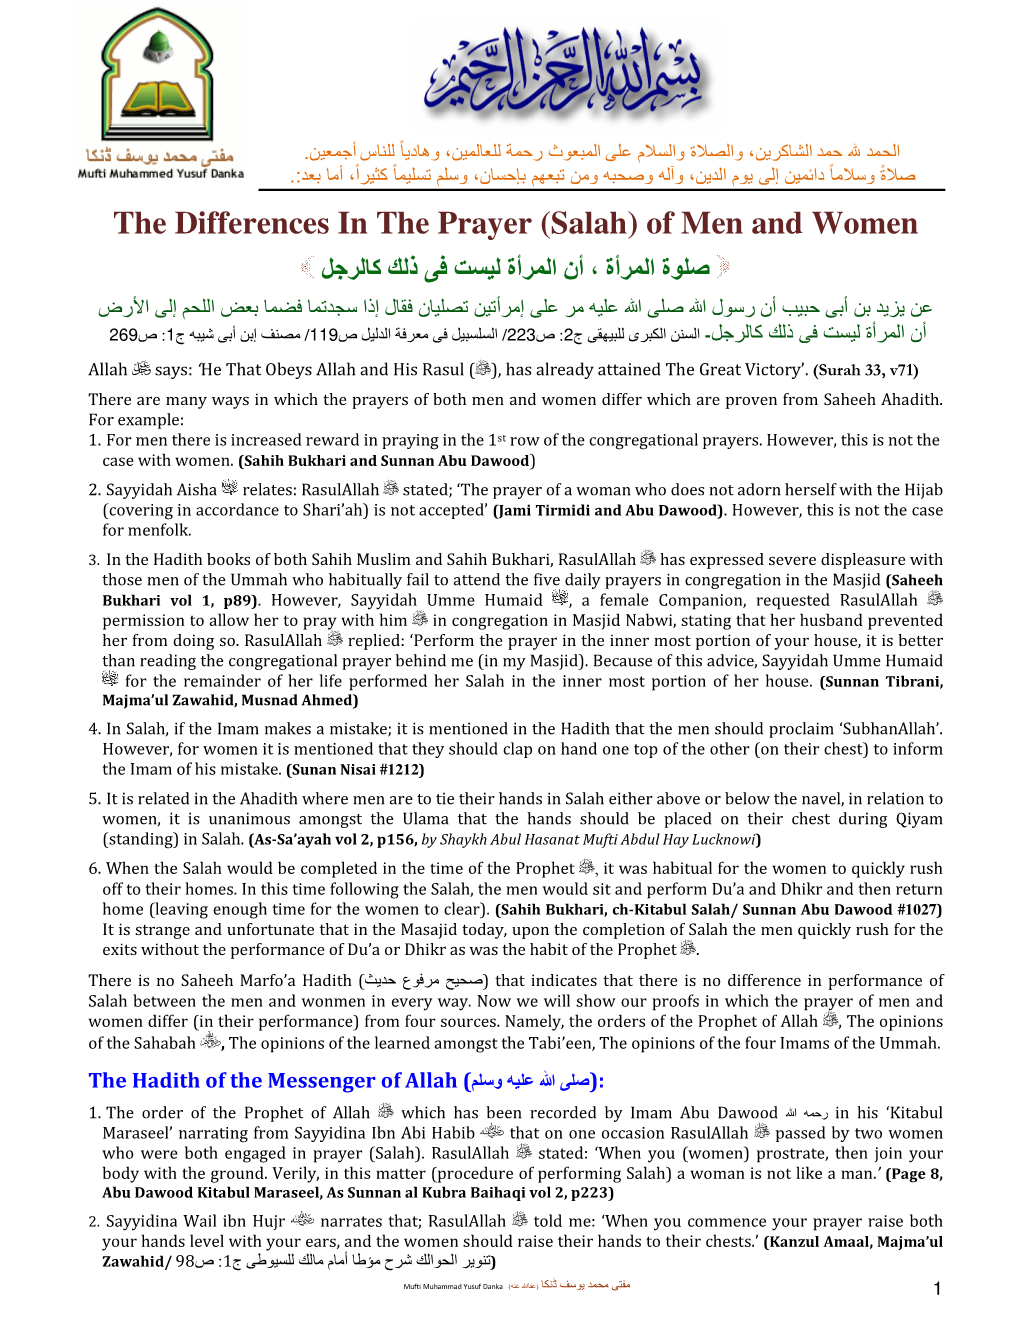 The Differences in the Prayer (Salah) of Men and Women